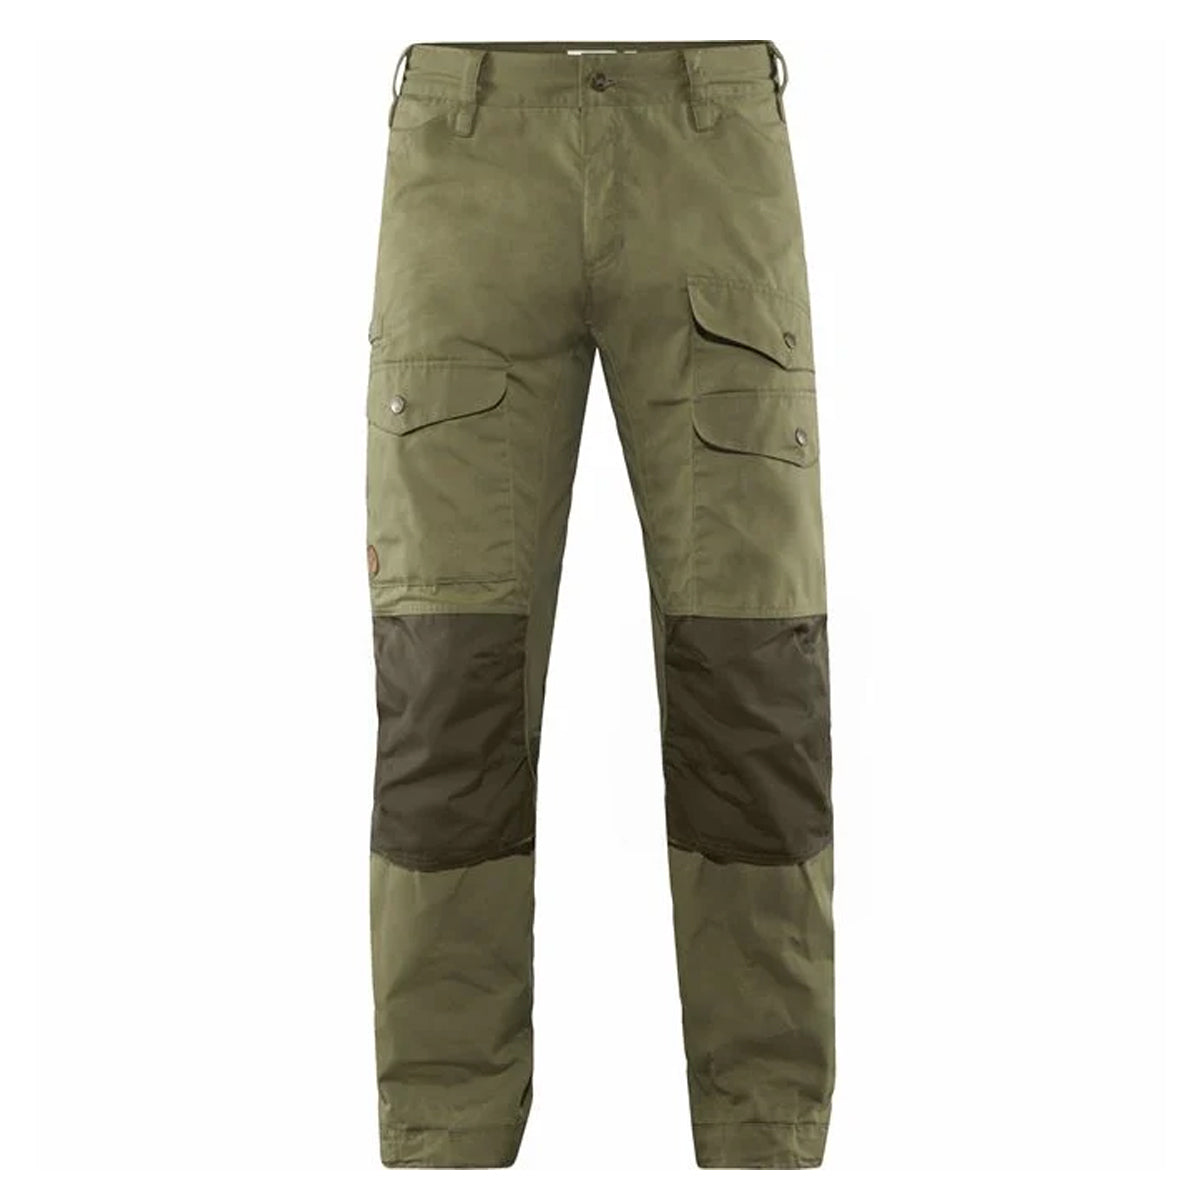 Shop for Pro Ventilated Trousers | GOHUNT